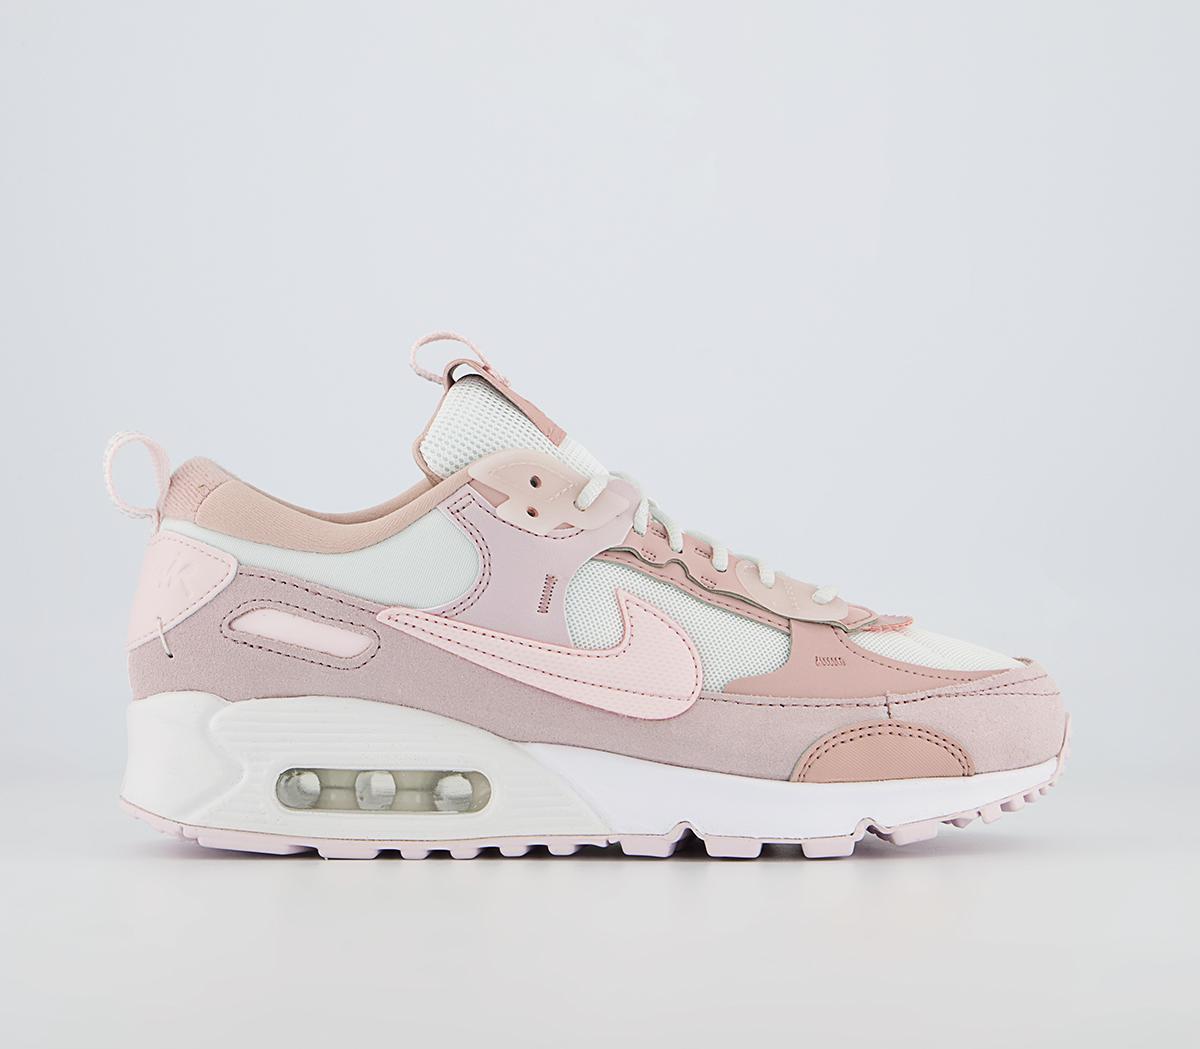 Nike Air Max 90 Futura Trainers Summit White Light Soft Pink Barely Rose - Nike Max